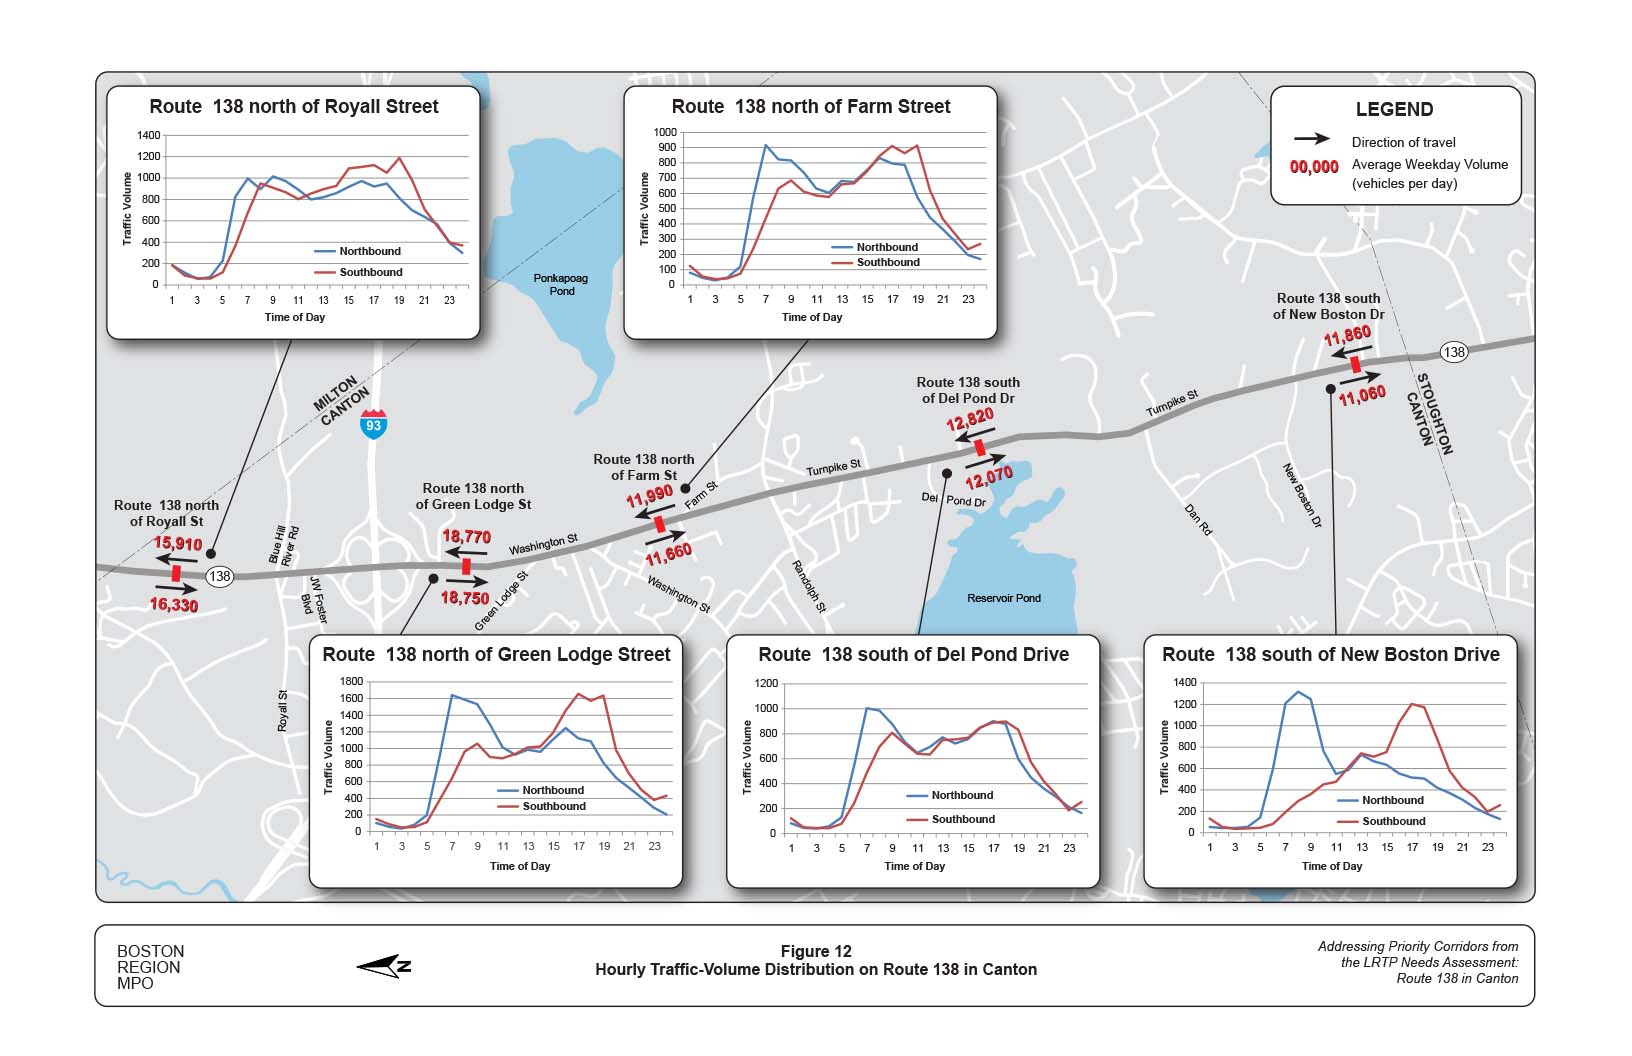 Figure 12 is a map of the study area showing hourly traffic-volume distribution on Route 138.